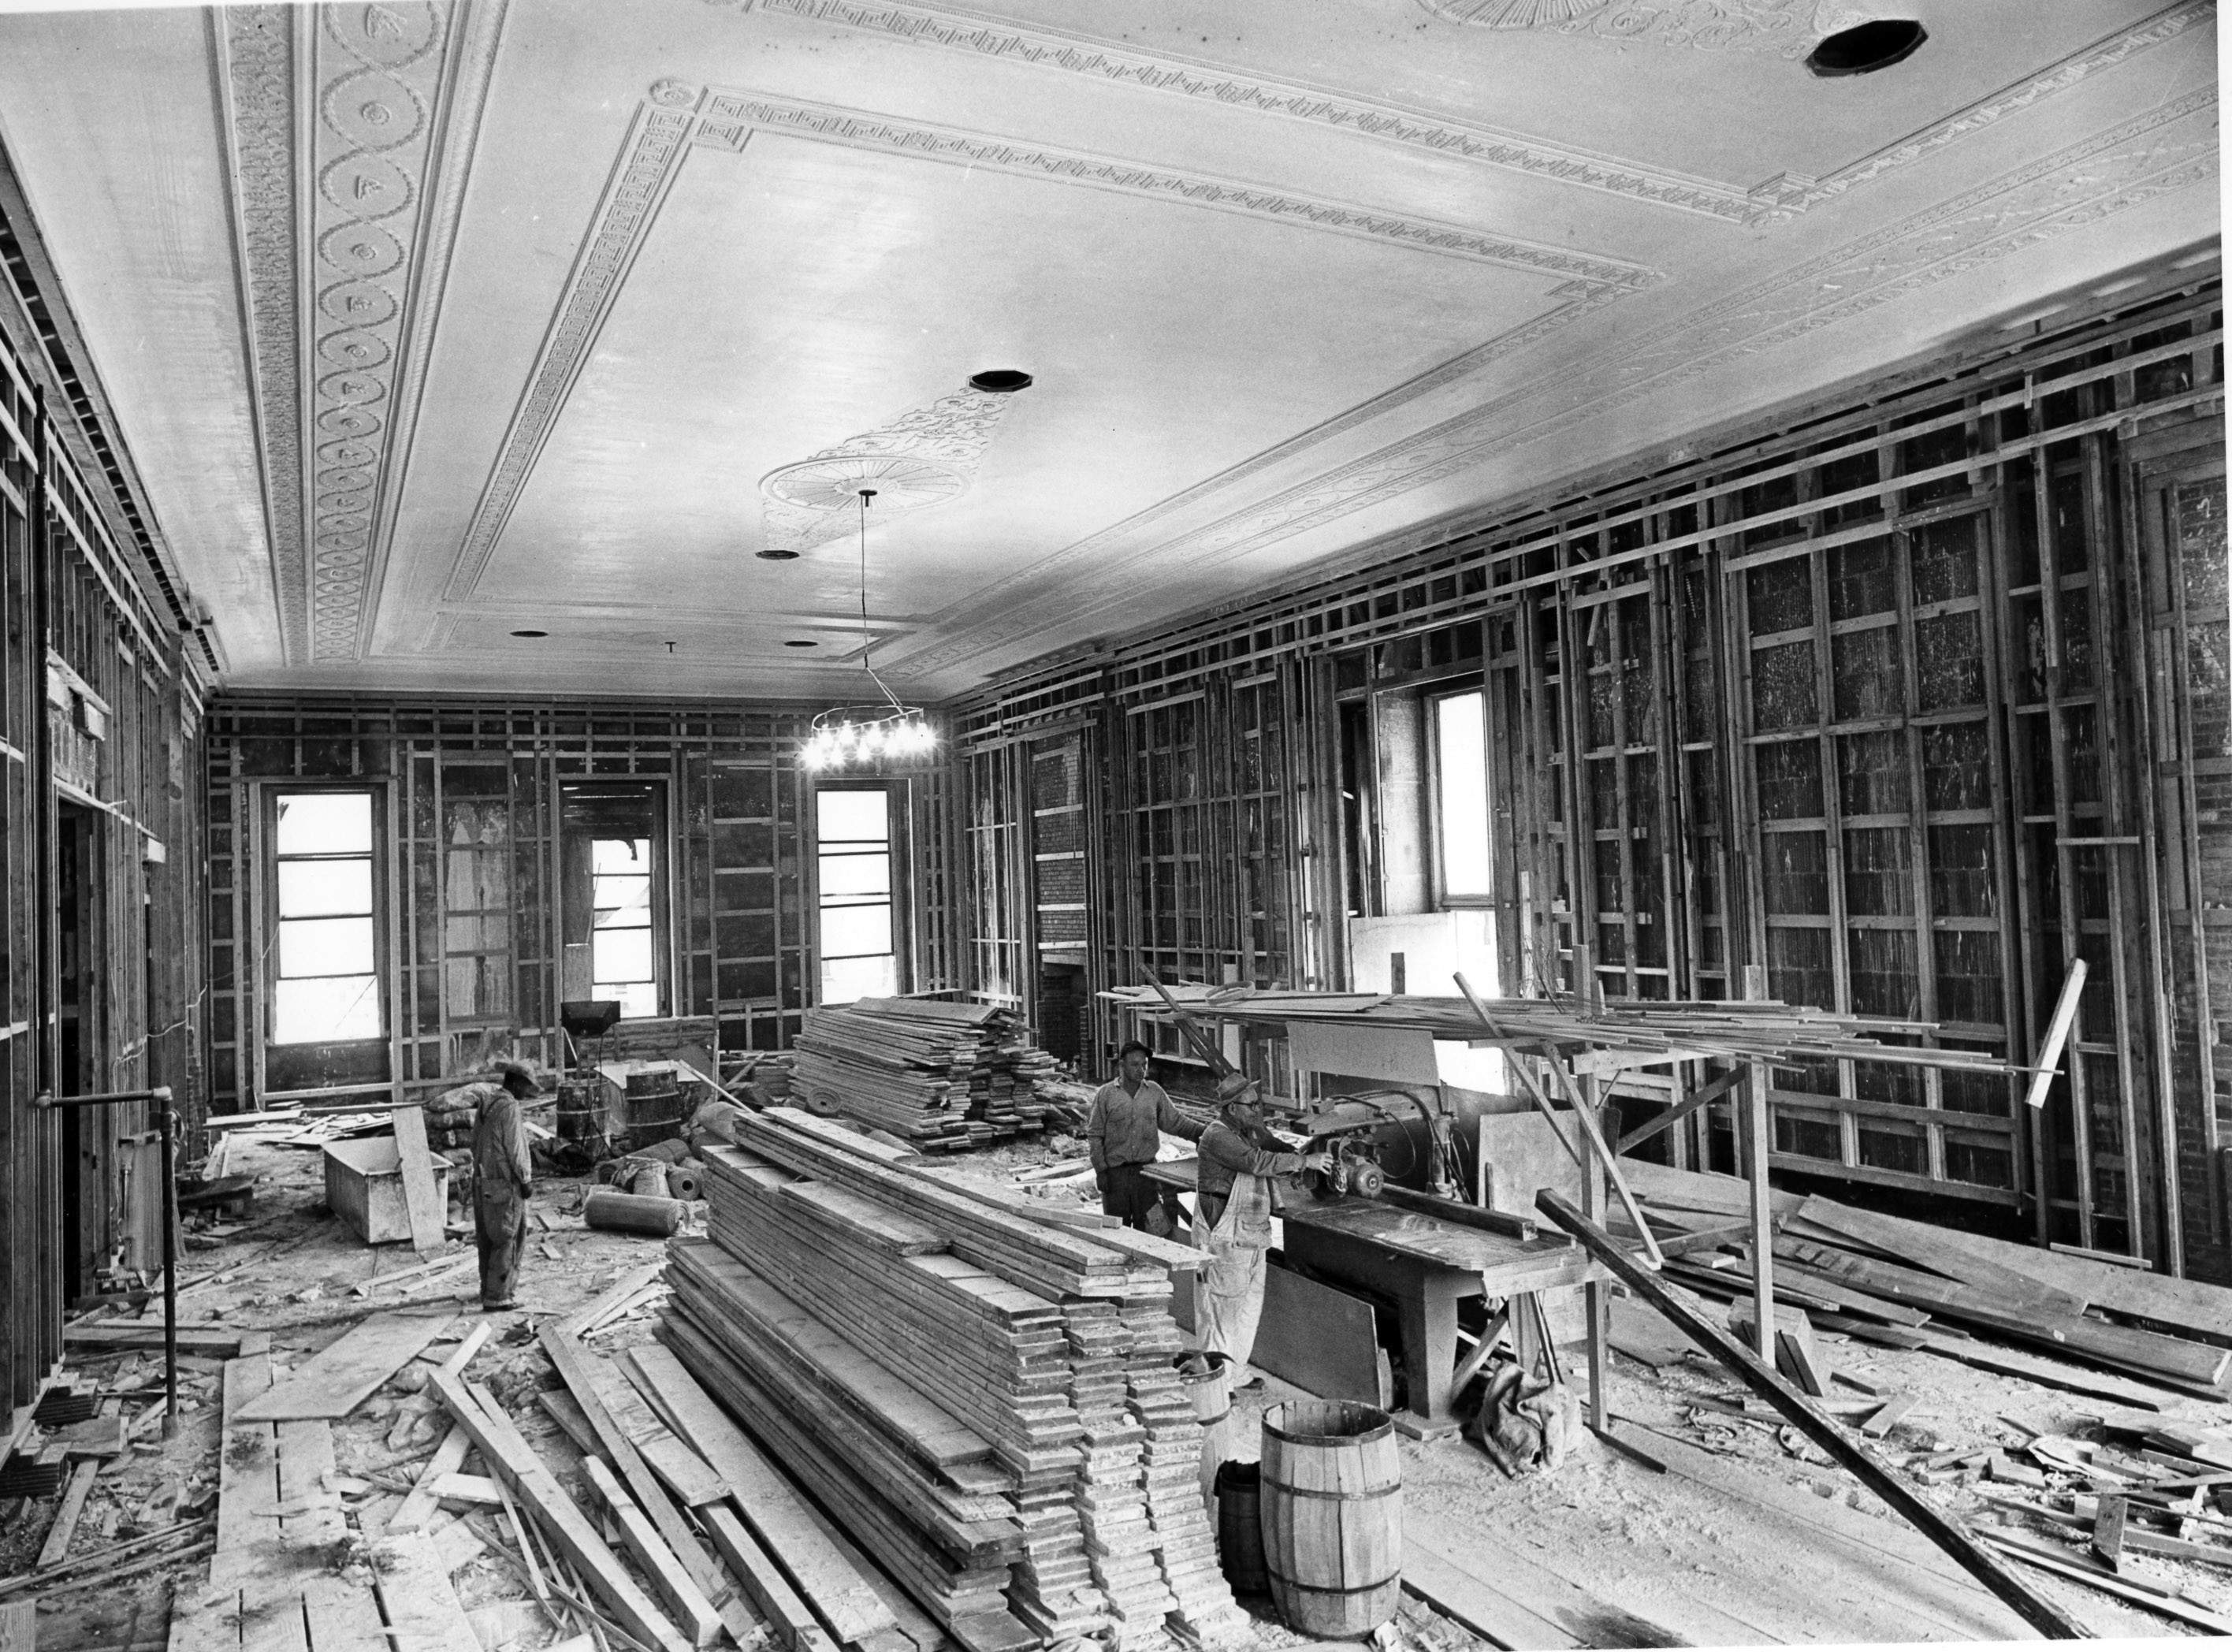 Northeast_View_in_the_East_Room_during_the_White_House_Renovation-06-21-1951